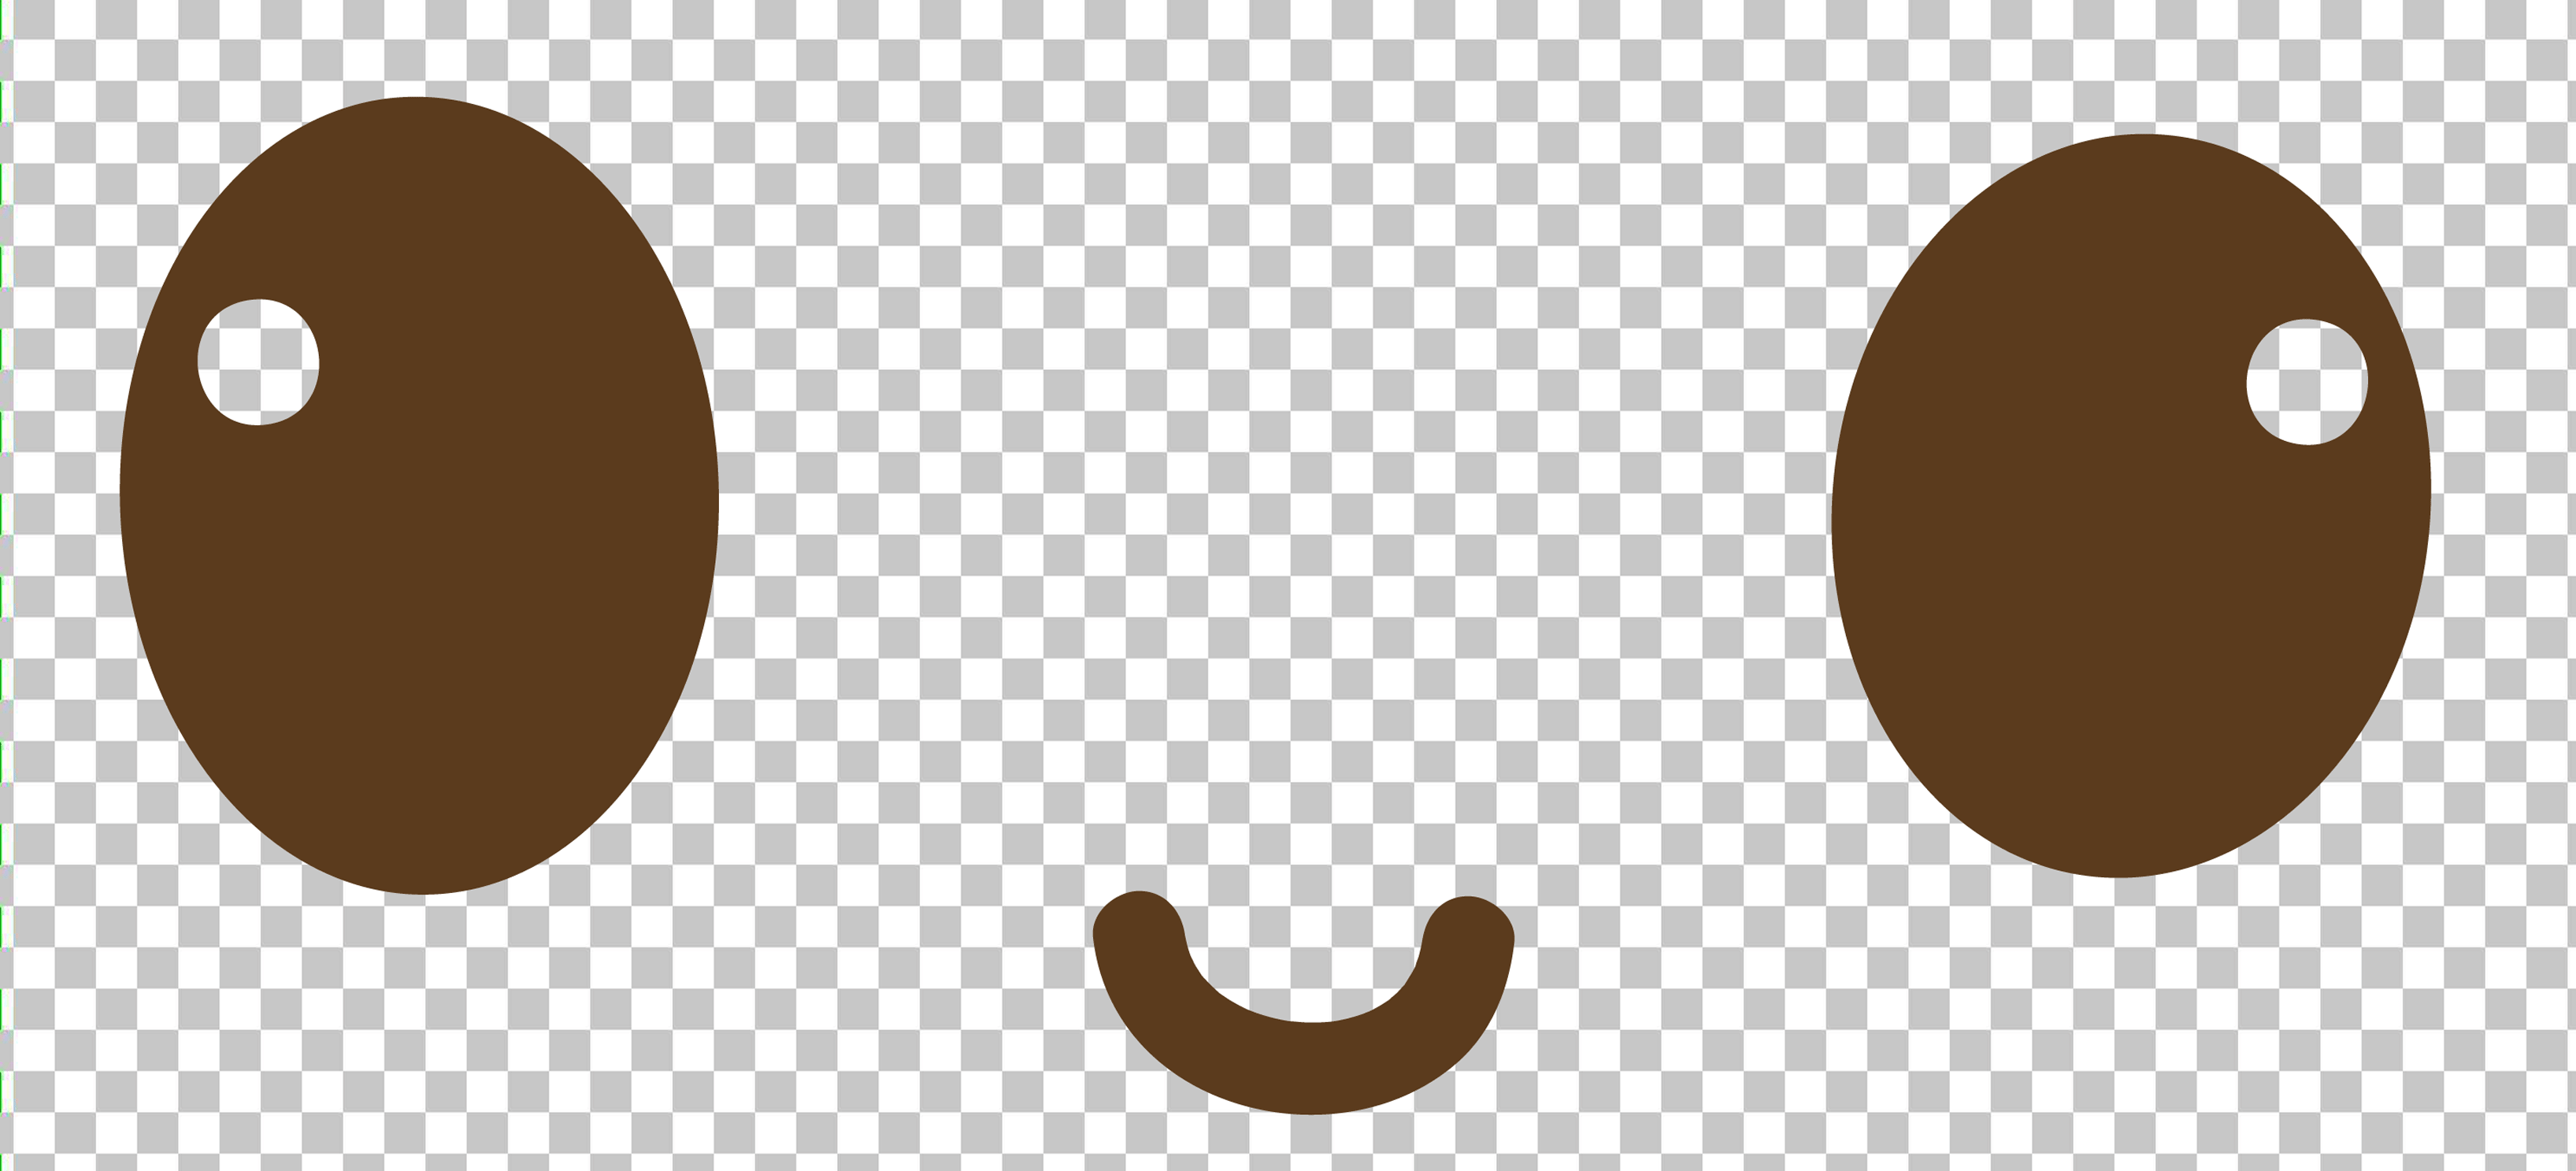 Smiley Face with Brown Eyes and Closed-Mouth Smile PNG Image